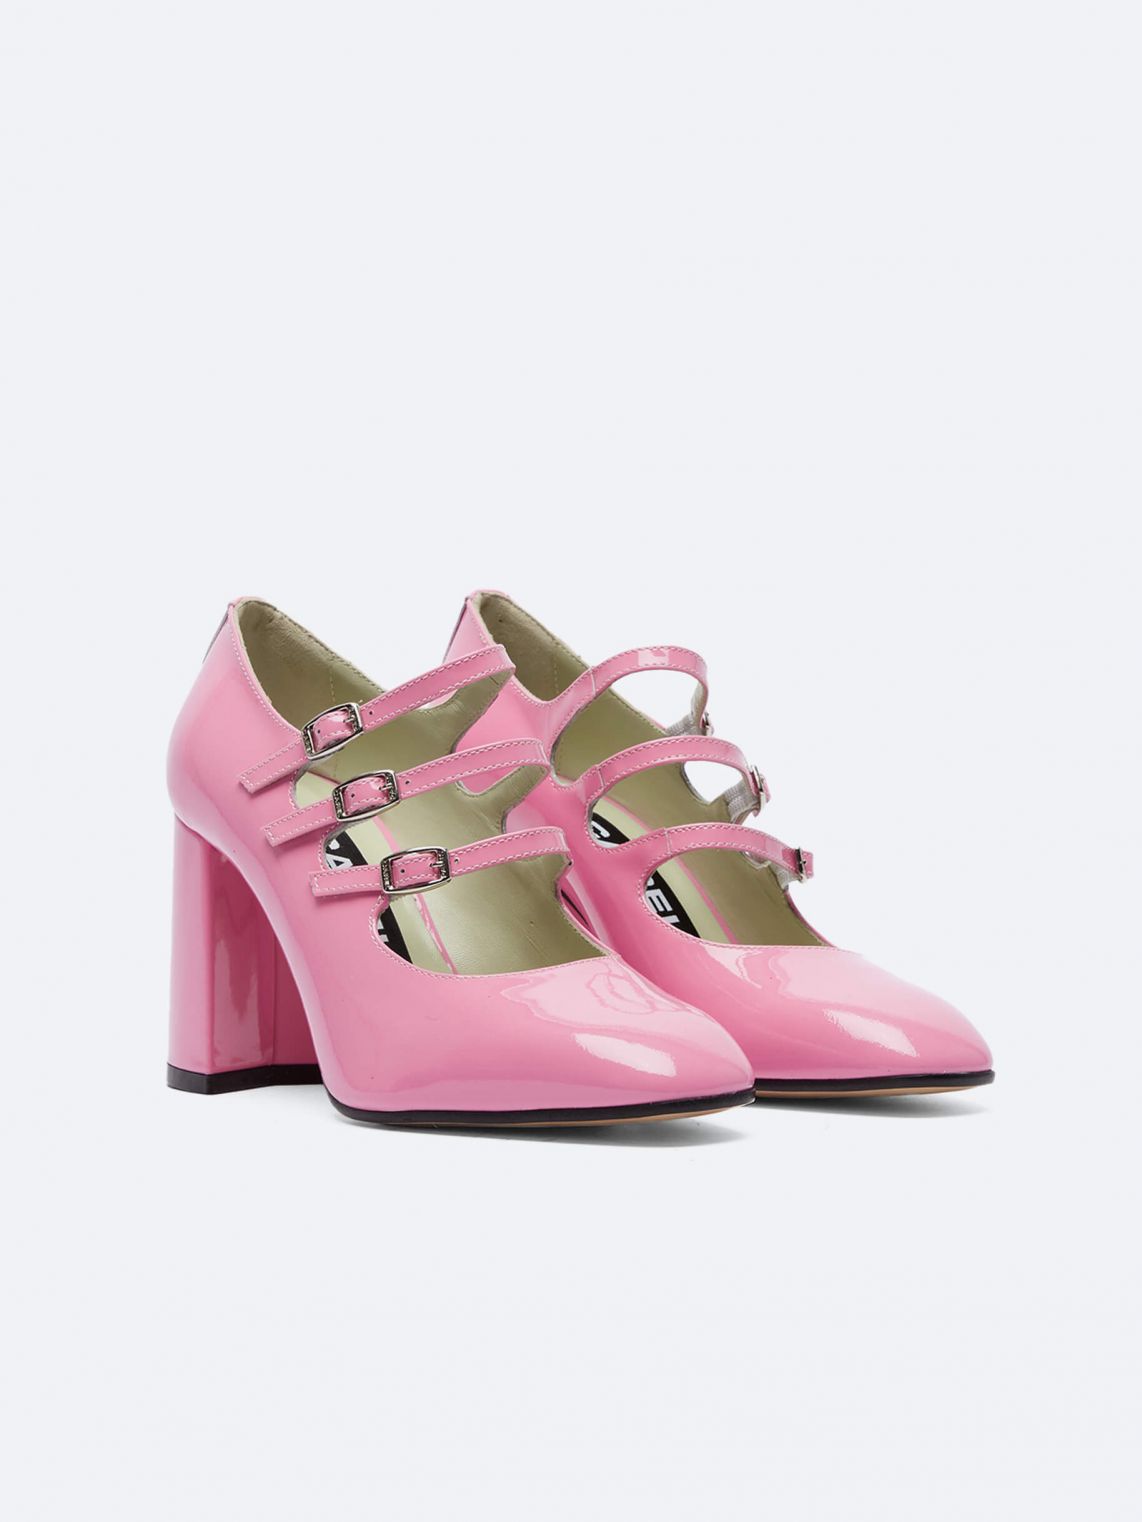 KEEL pink patent leather Mary Janes | Carel Paris Shoes